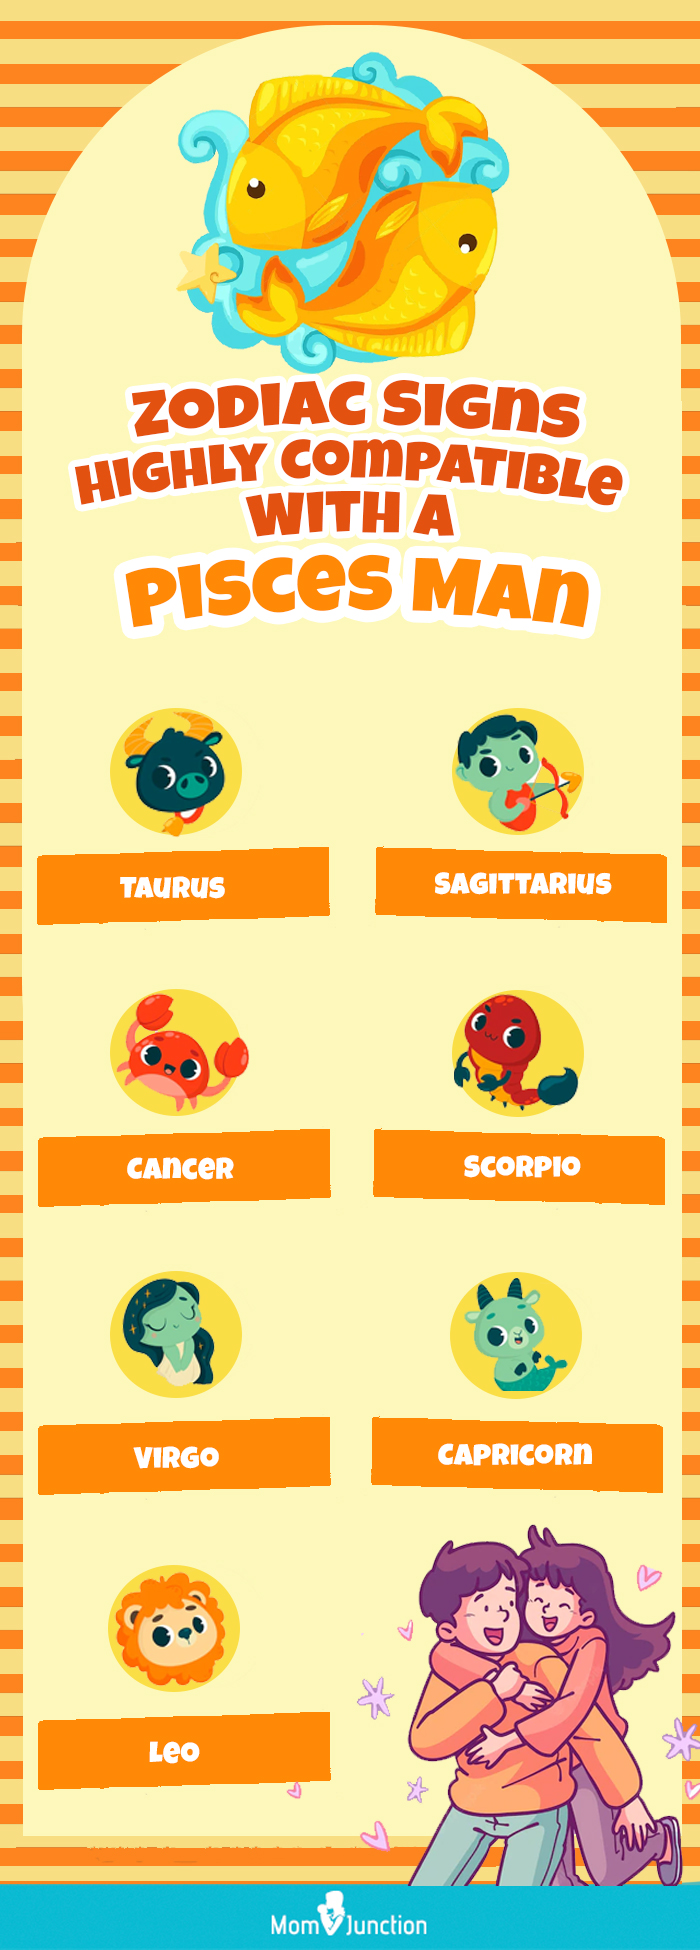 zodiac signs highly compatible with a pisces man (infographic)